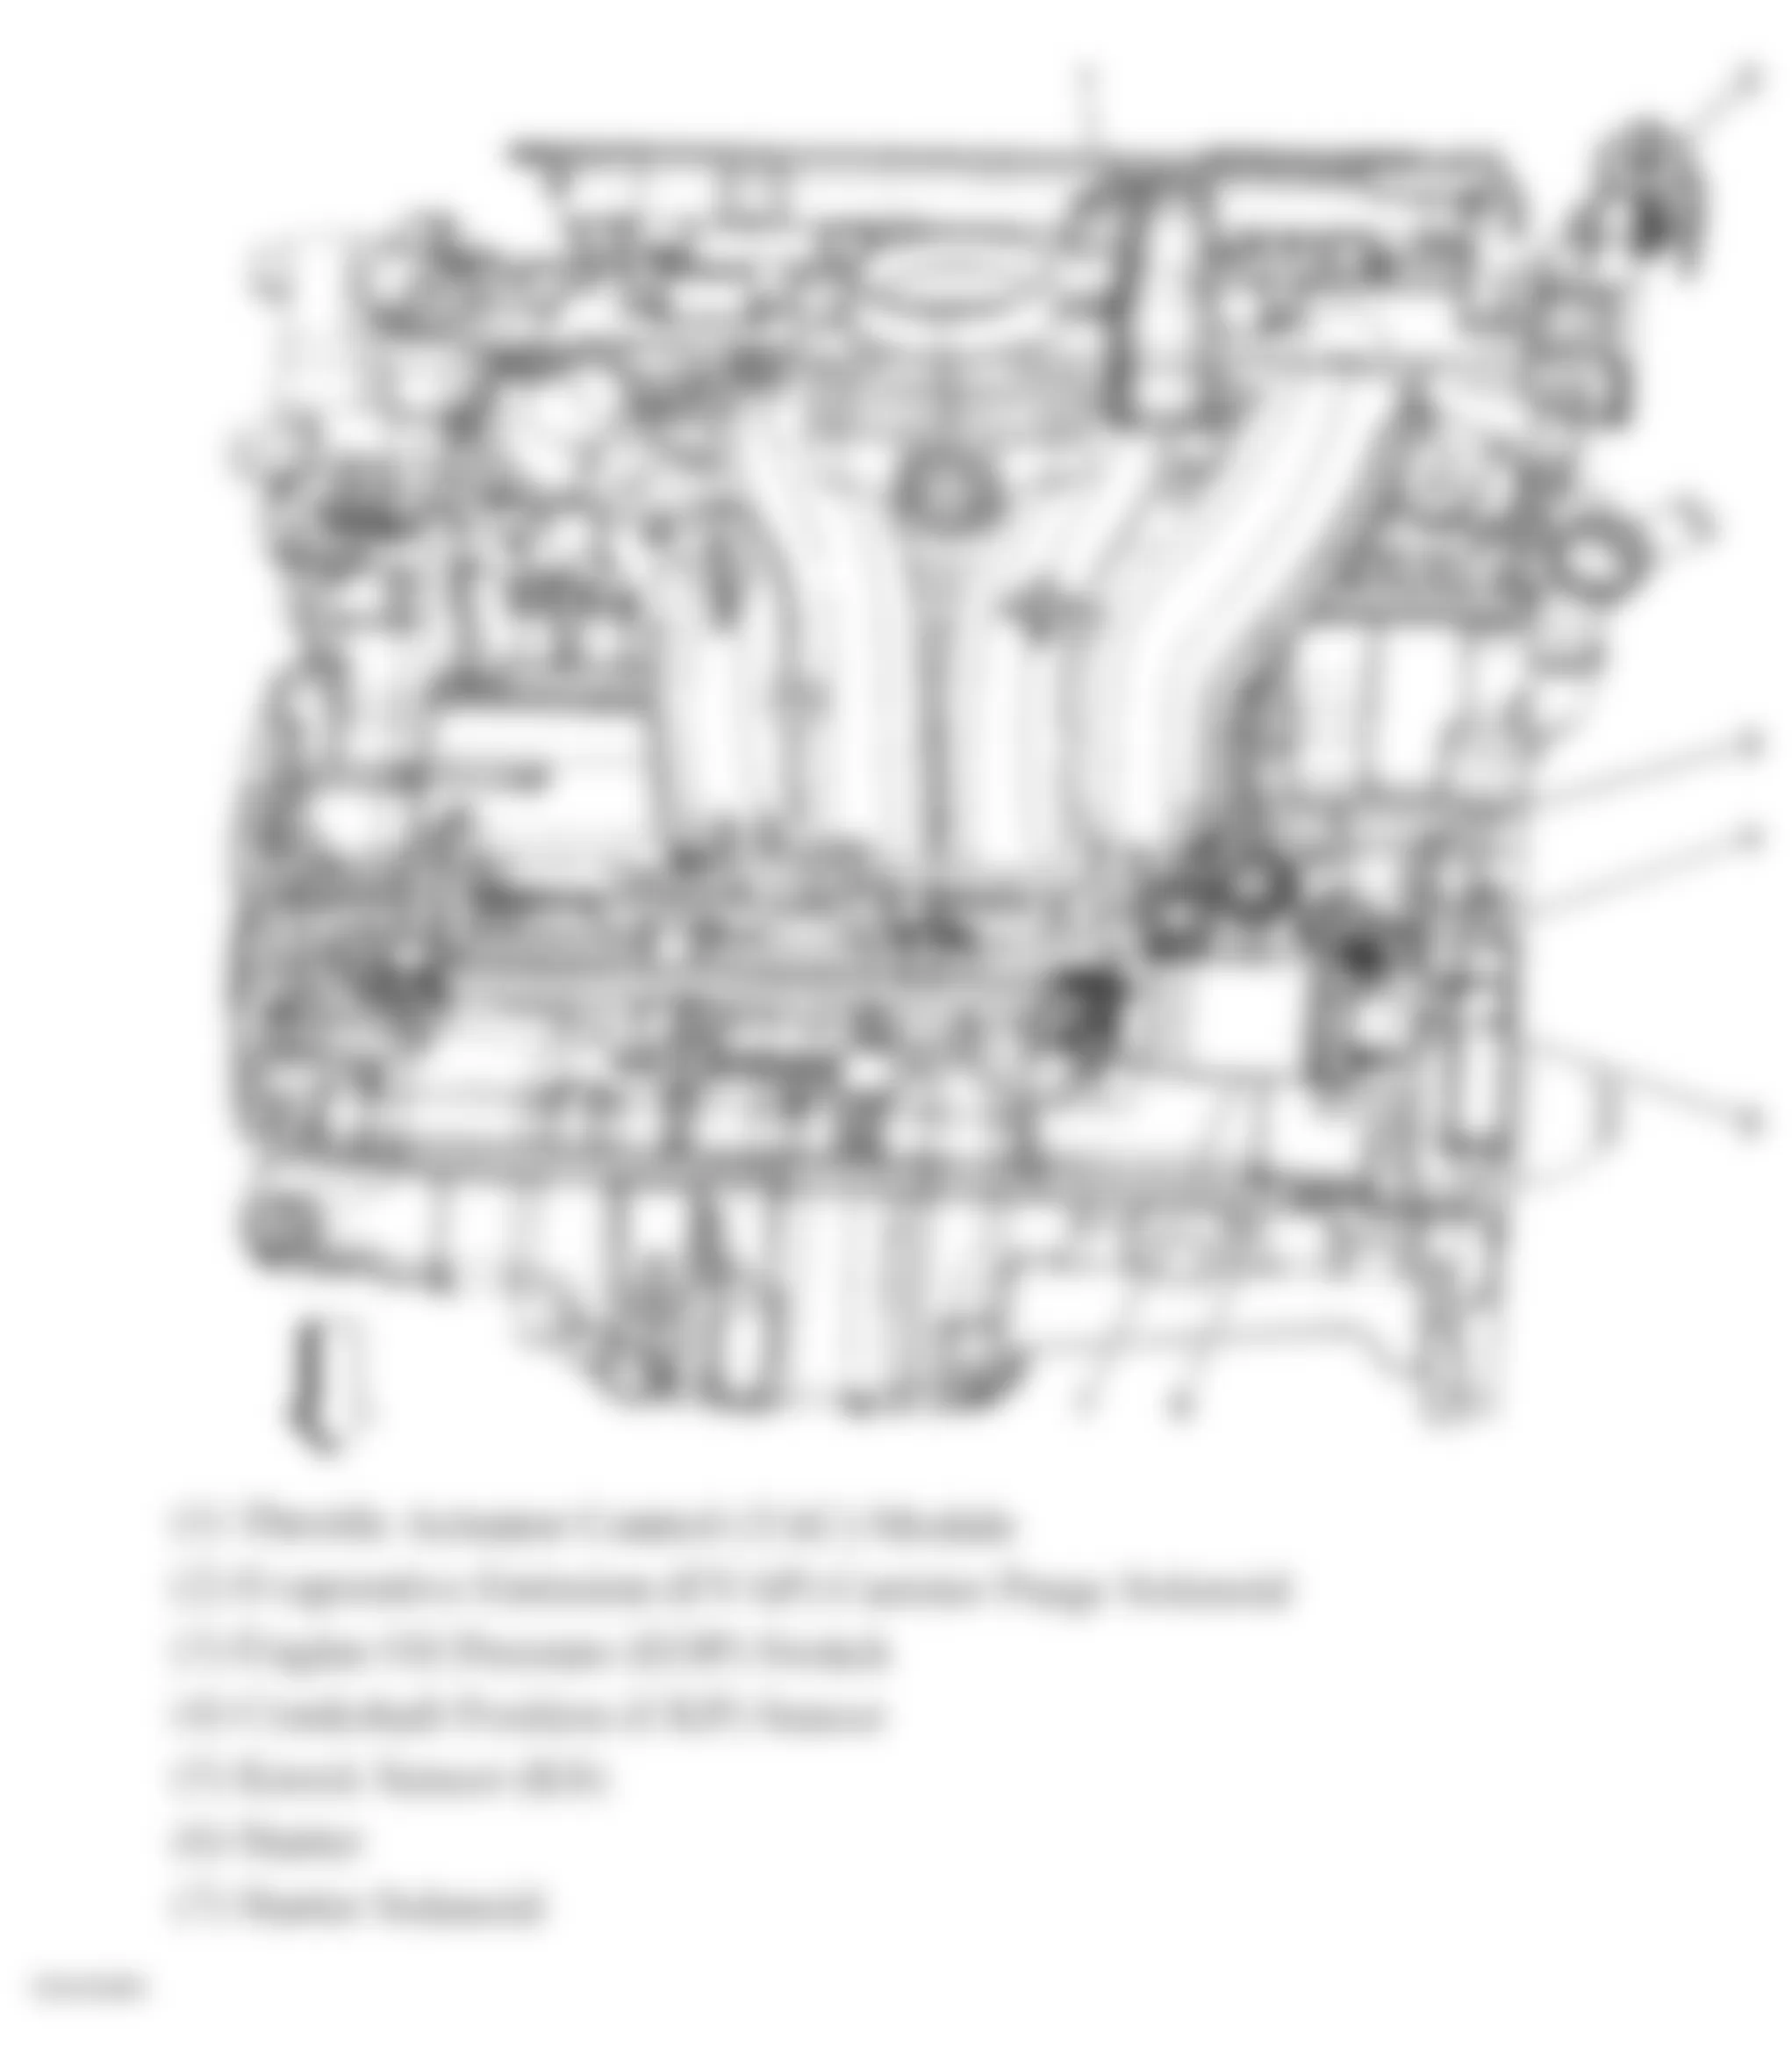 Chevrolet HHR LT 2010 - Component Locations -  Front Of Engine (2.2L)